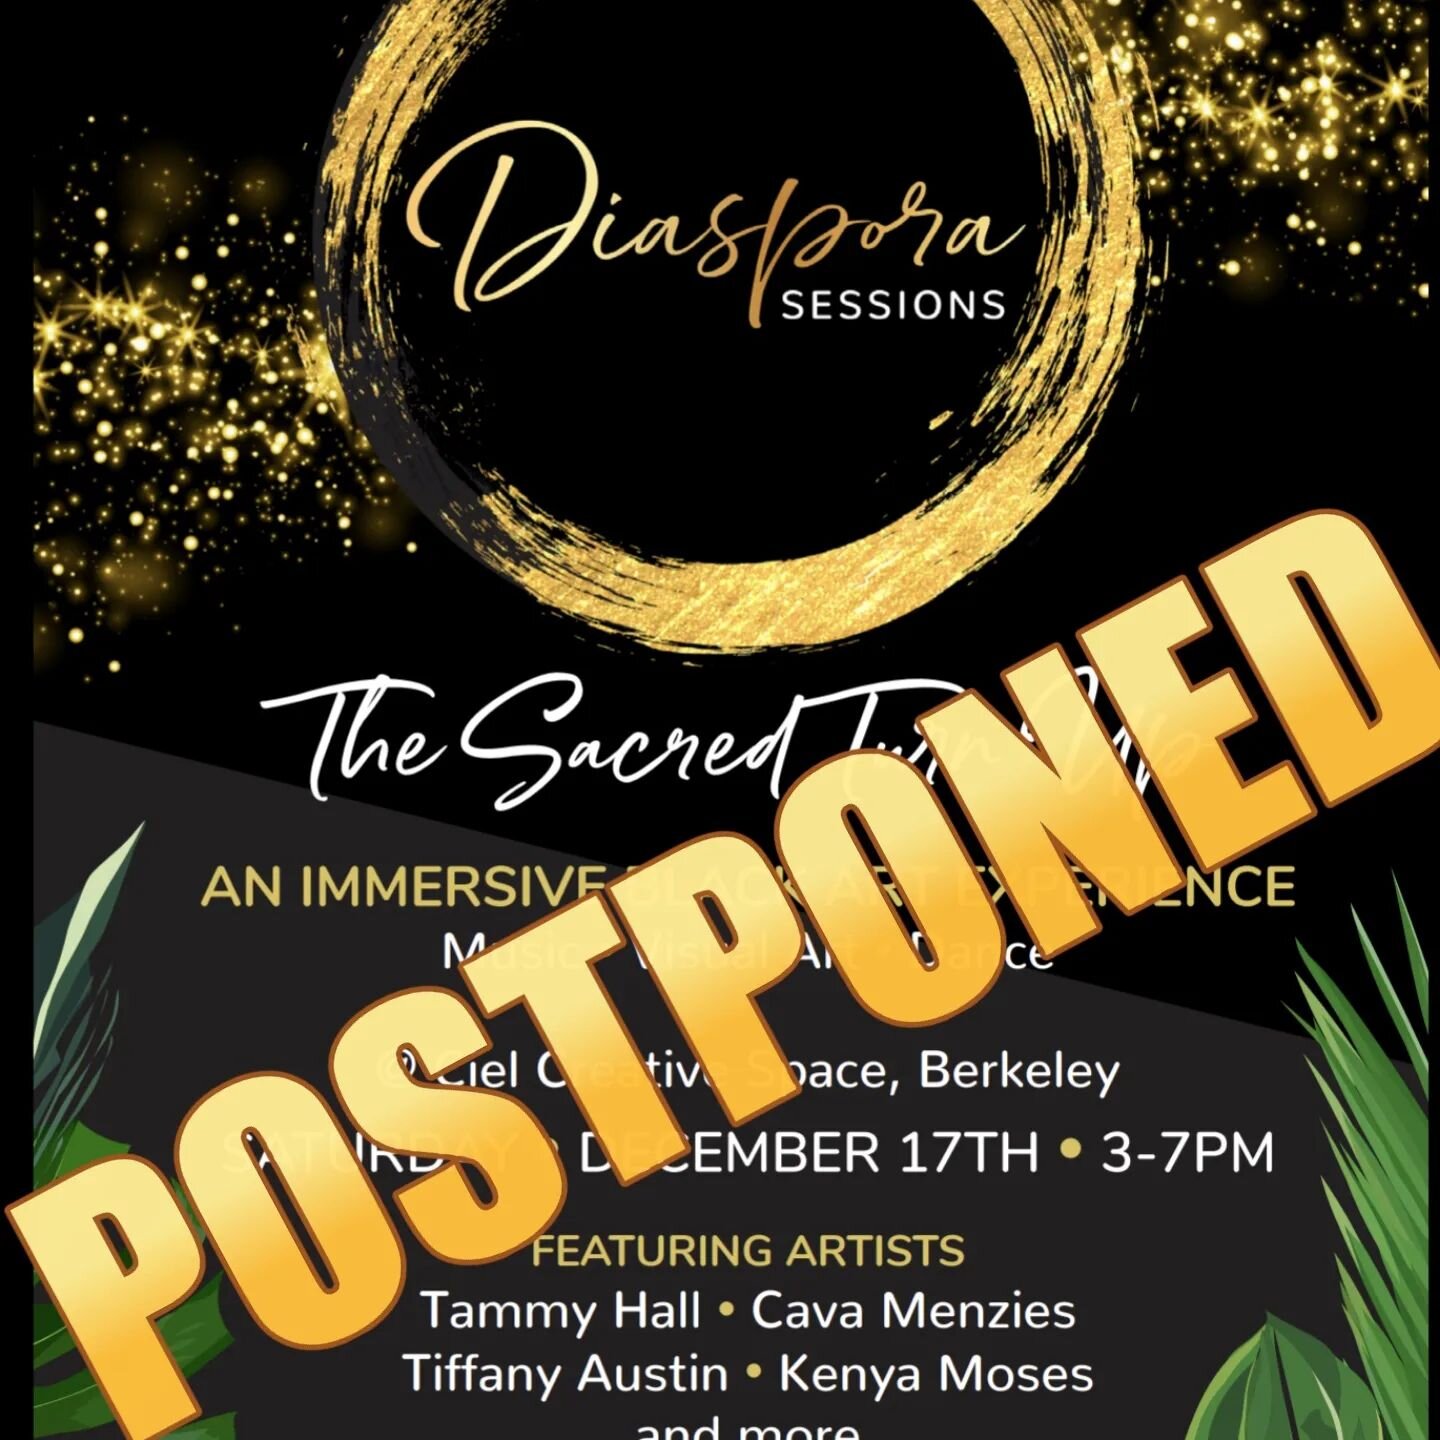 Hey Fam, due to unforeseen circumstances, The Sacred Turn Up has been postponed until Spring of next year. In the meantime, we'll be bringing you online content, including music, videos, and our Diaspora Sessions podcast launch.
😘💖✨🎶🙌🏾

@kenyamo